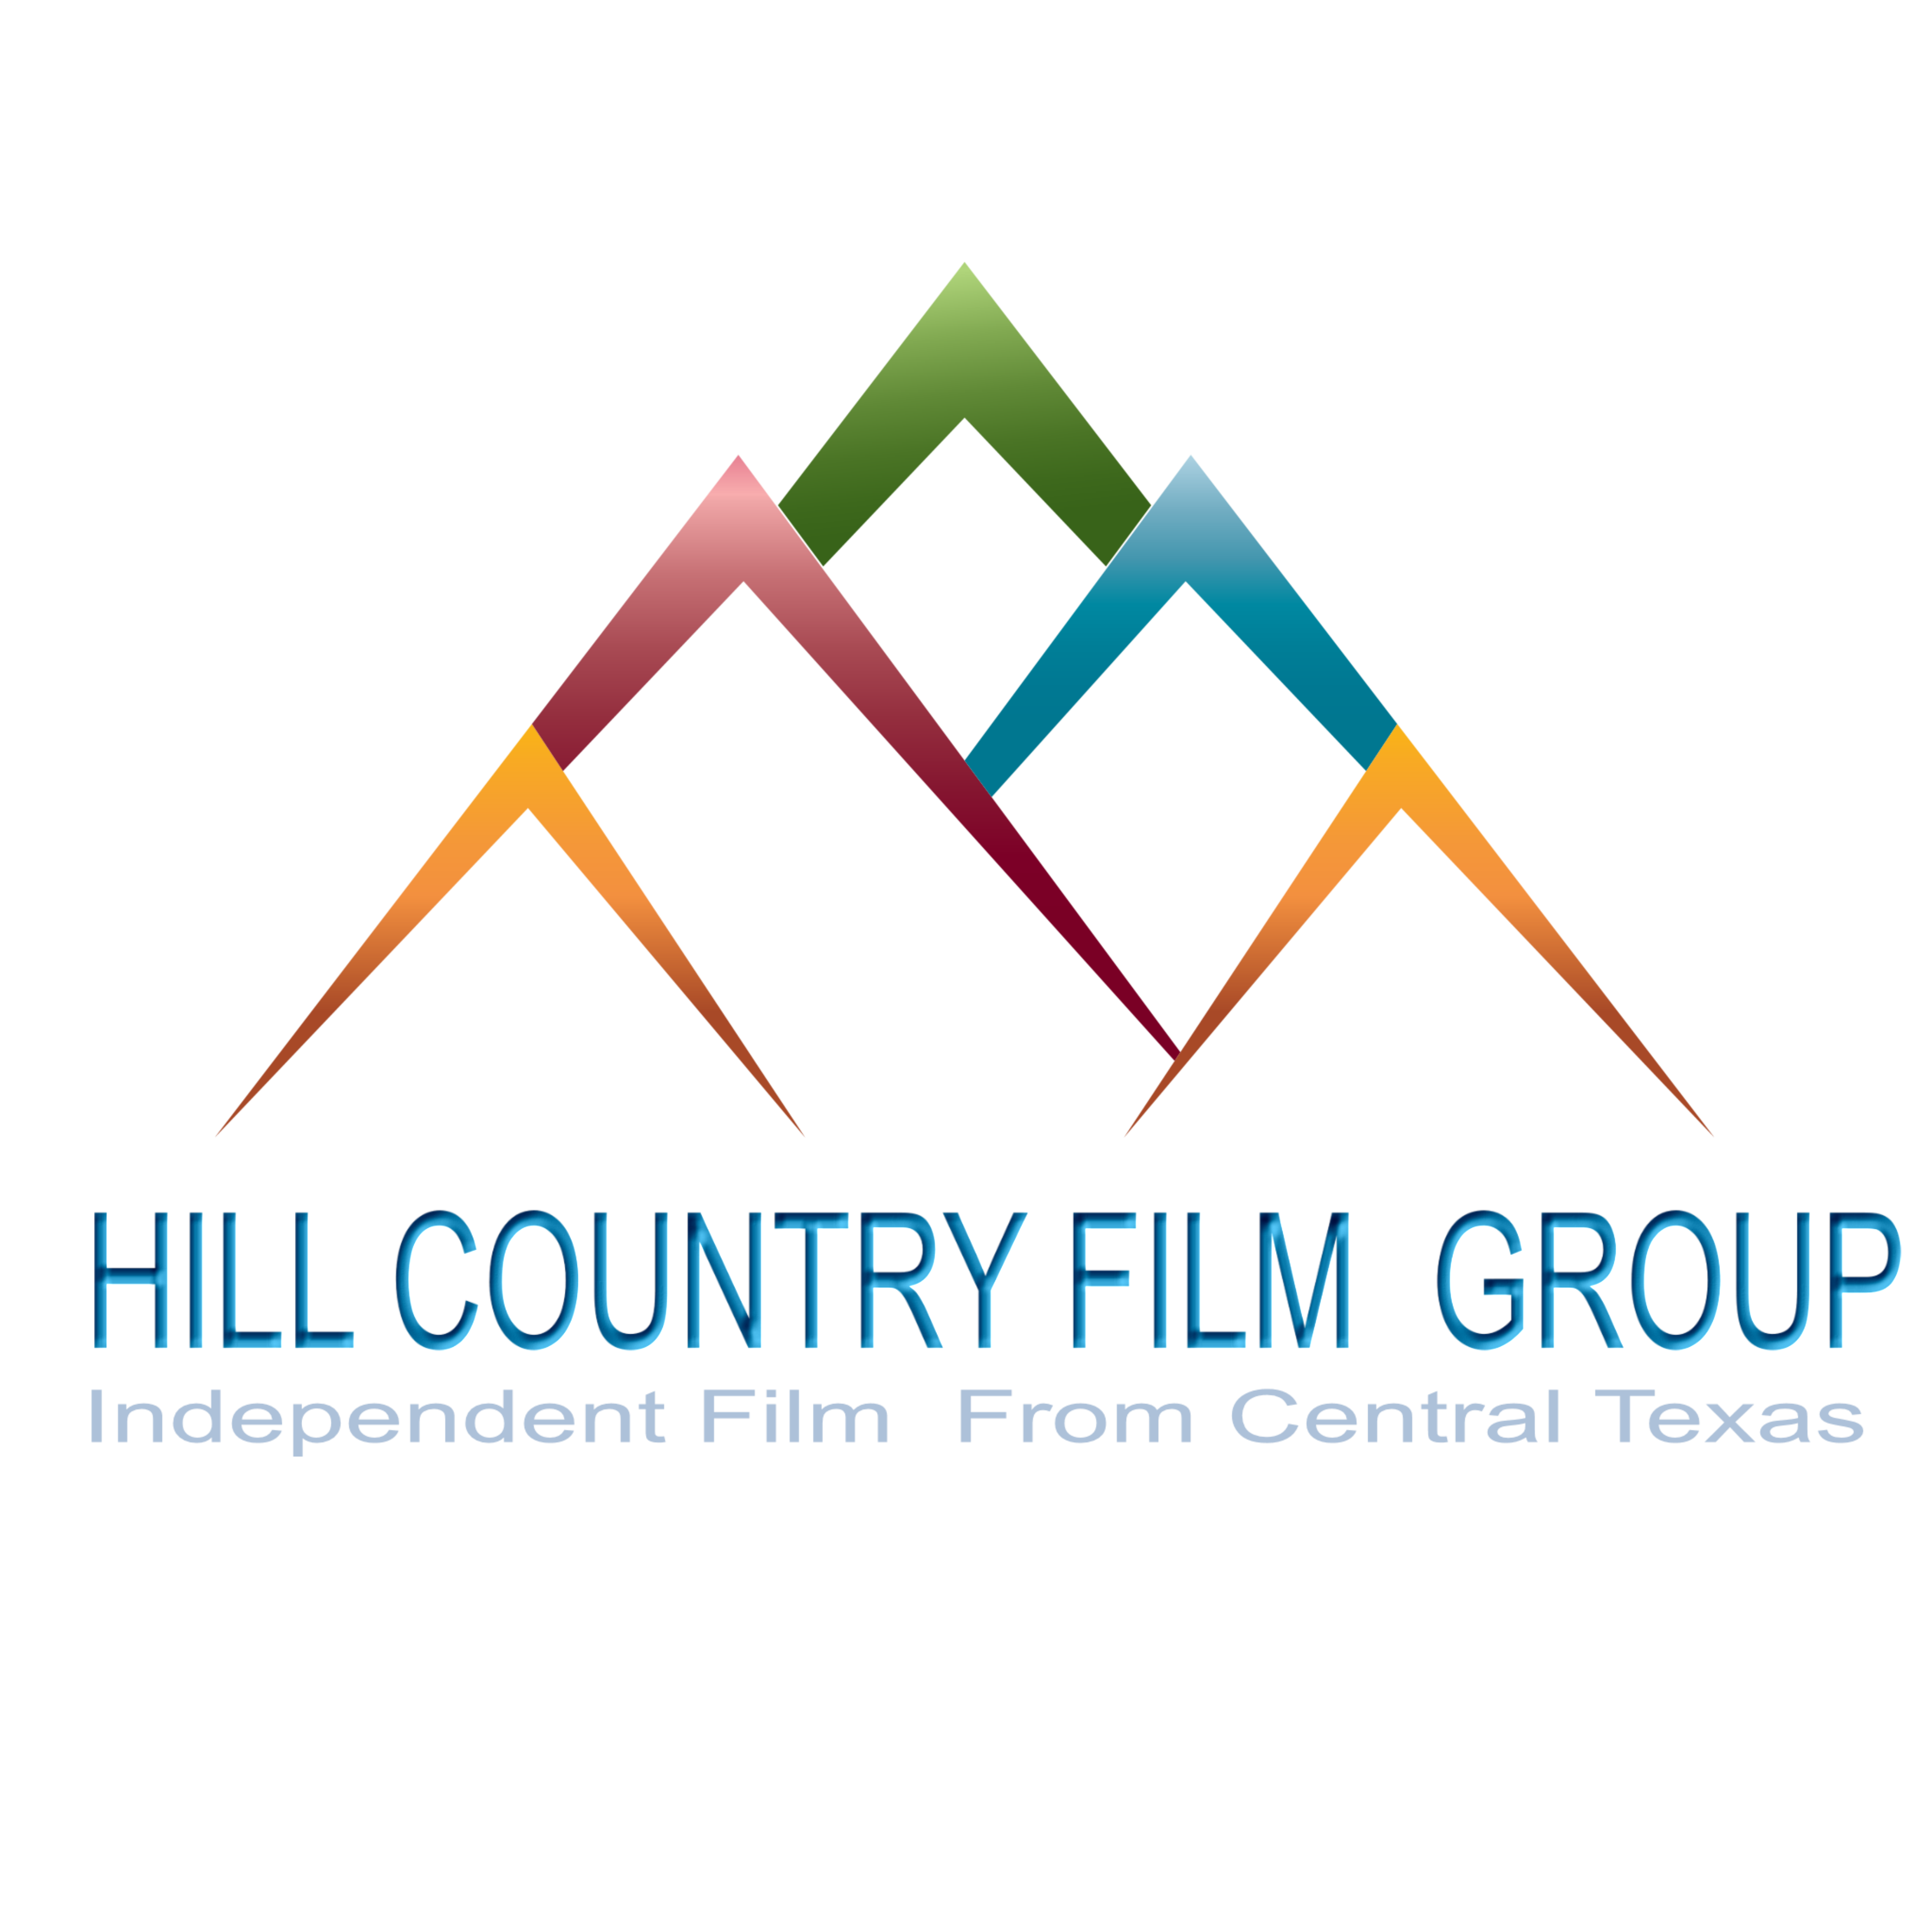 Hill Country Film Group